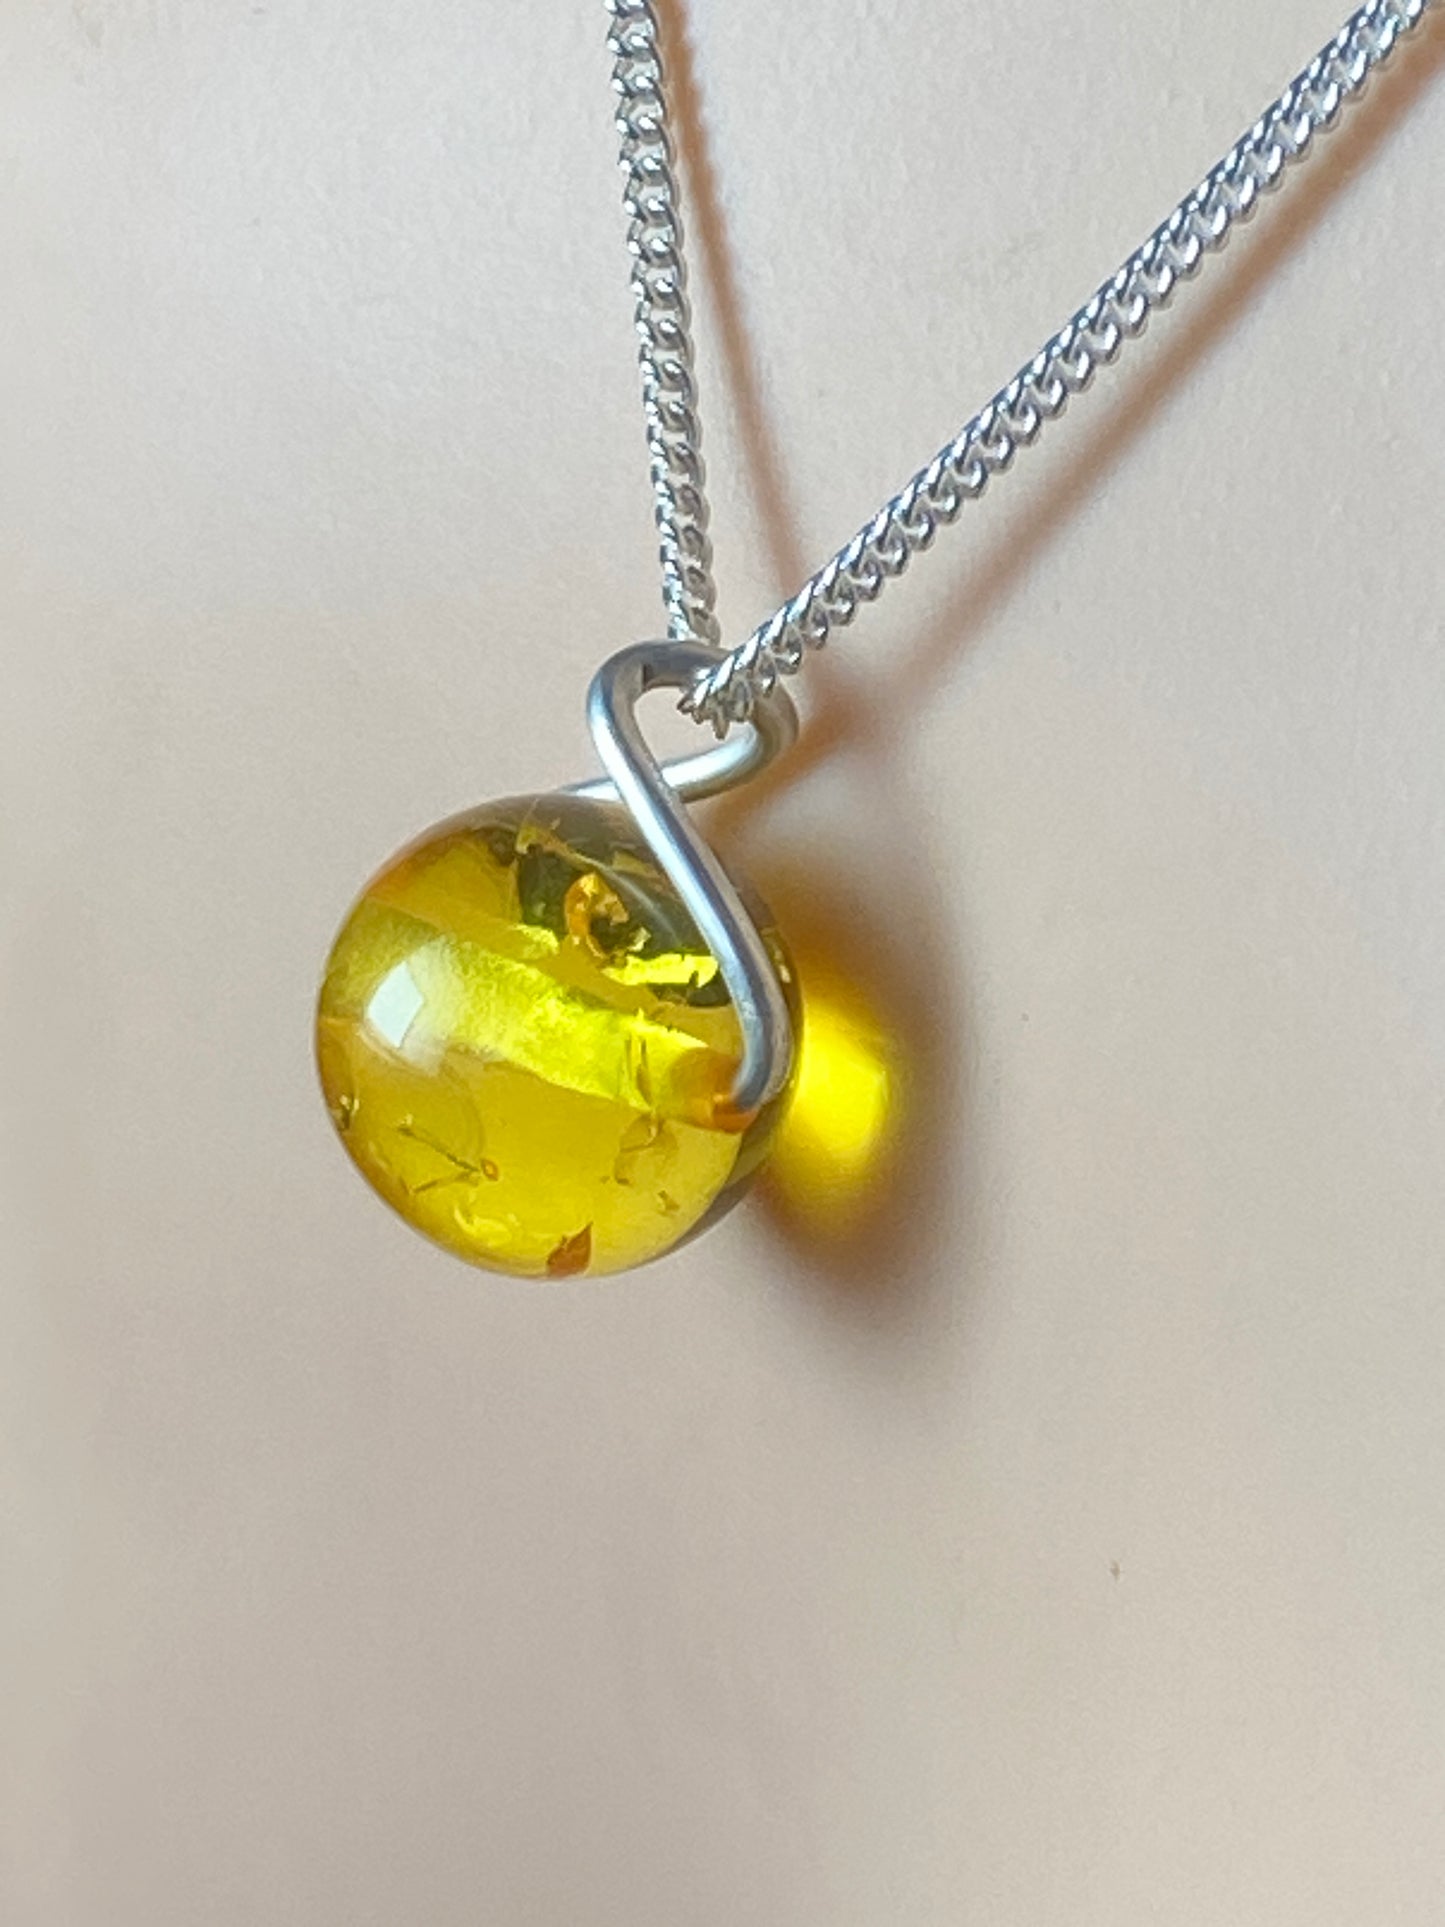 Amber Silver necklace, 18” silver chain